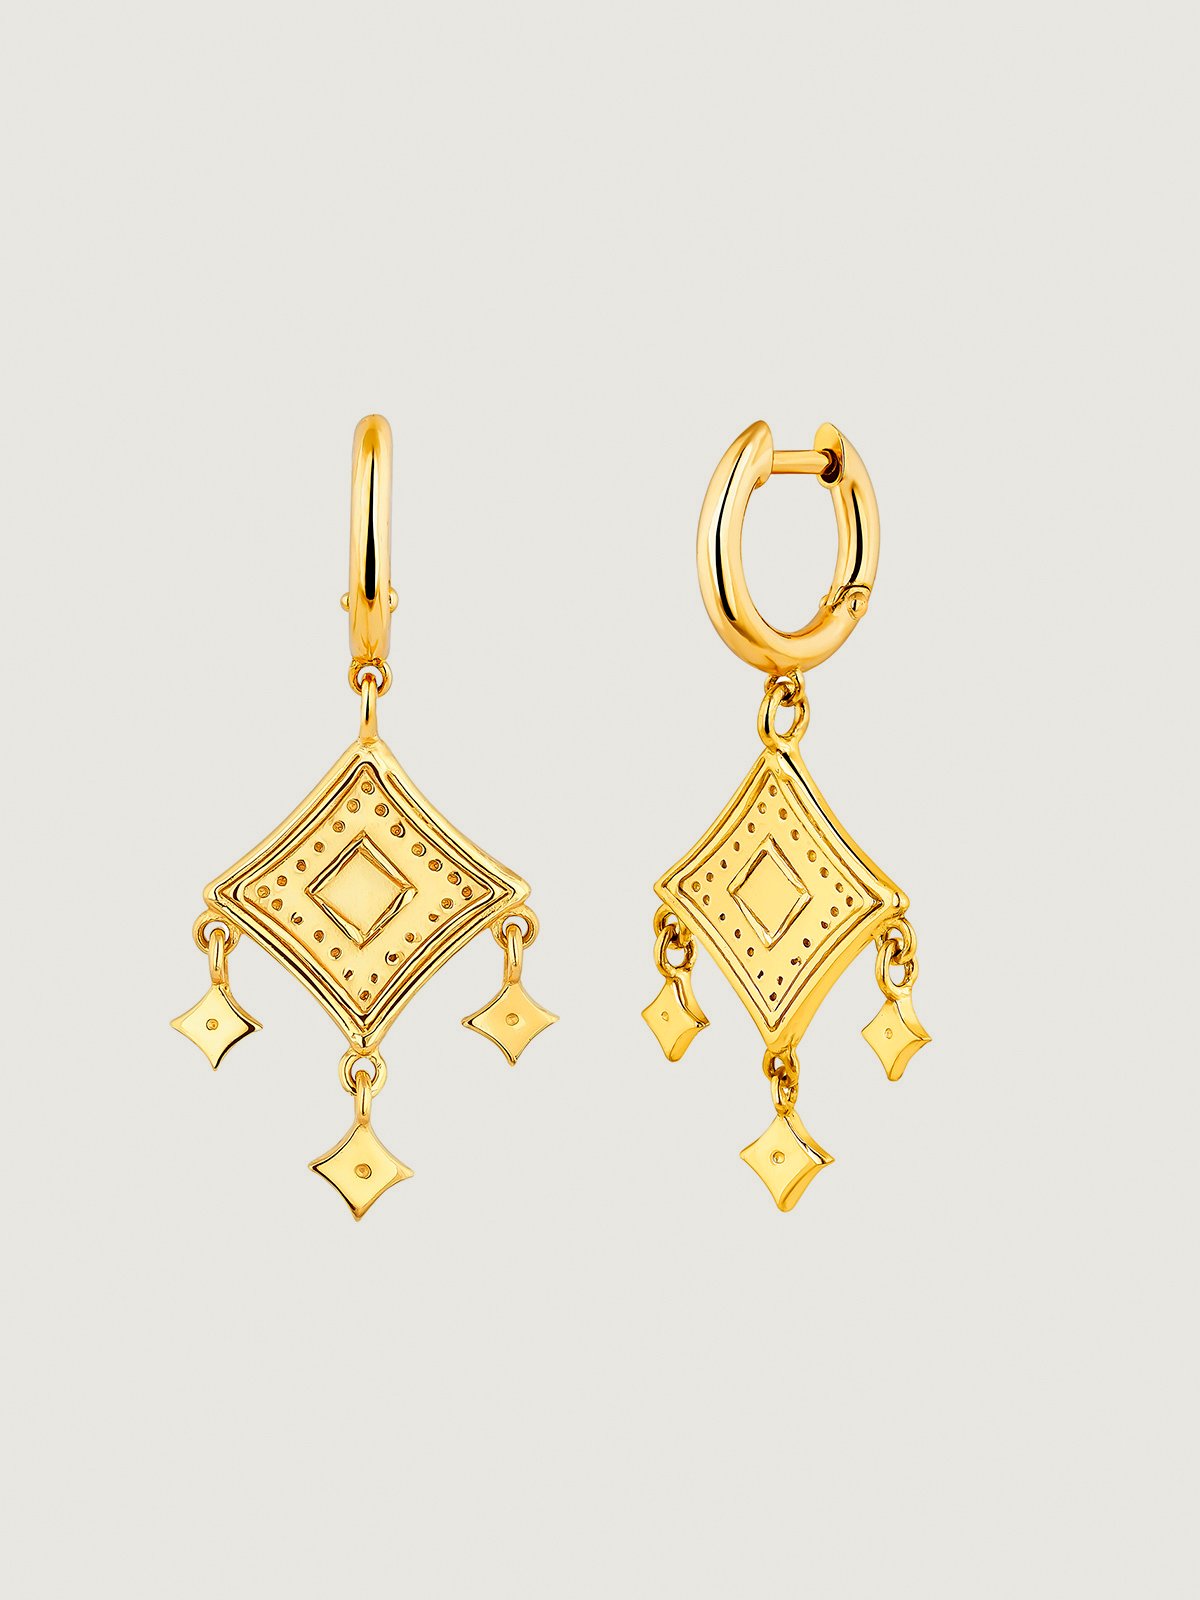 925 Silver hoop earrings bathed in 18K yellow gold with ethnic motifs